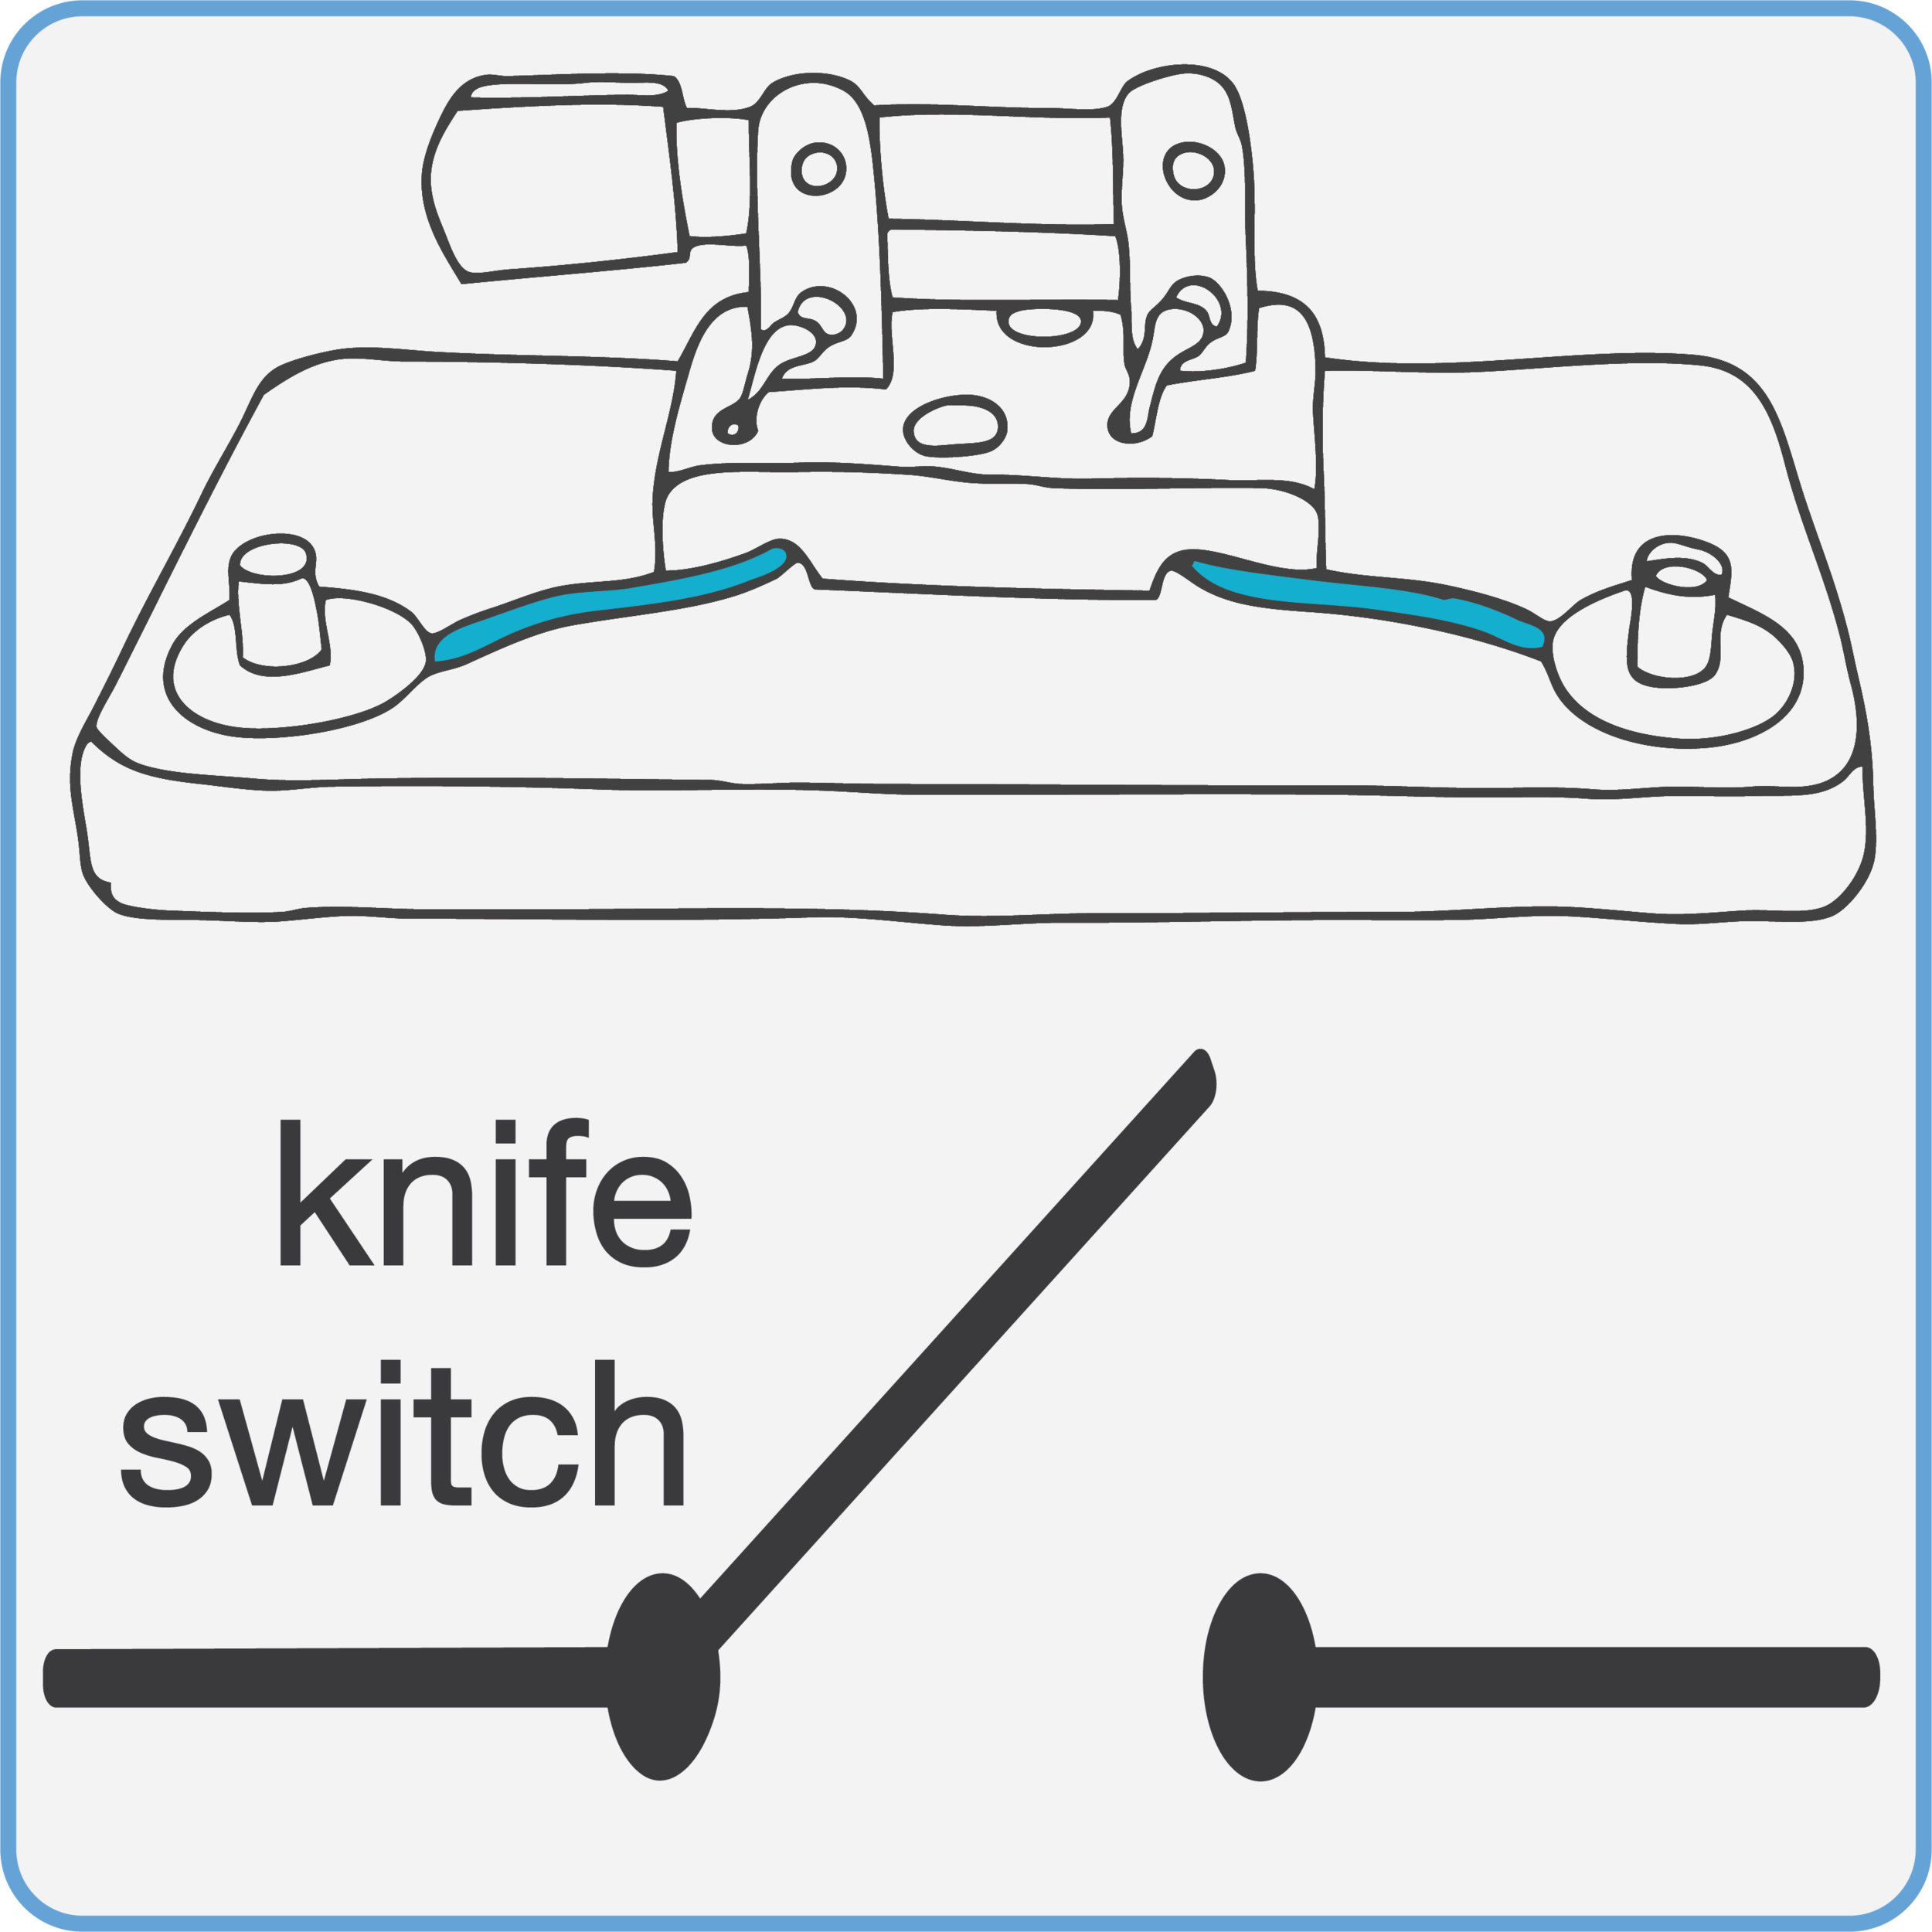 knife-schematic.png